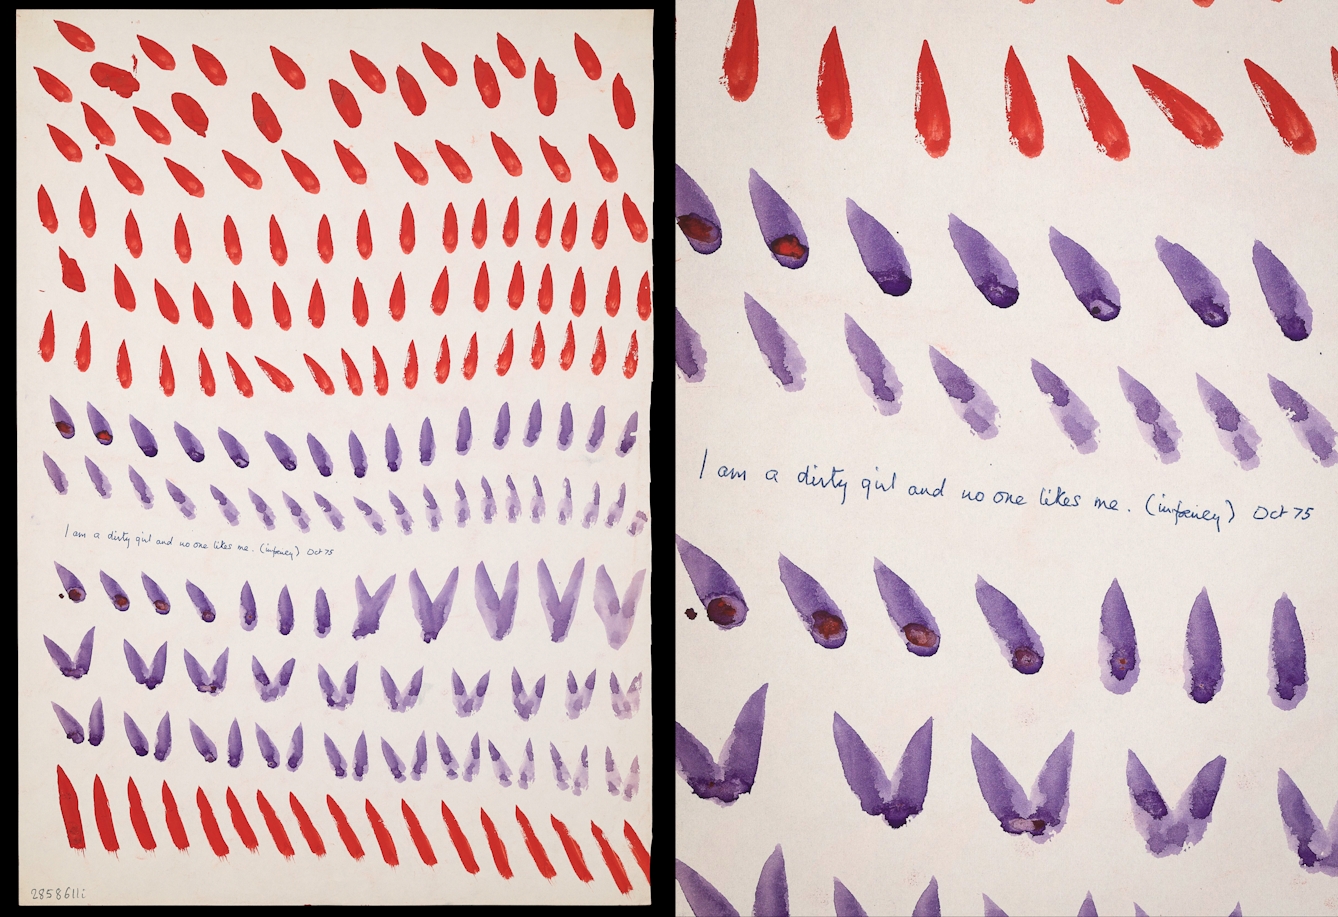 Photograph of a watercolour artwork showing a multitude of teardrop shapes and diagonal lines falling from the top of the page to the bottom. The teardrops are coloured in horizontal bands of red rows, purple rows and then back to red. In the centre of the page is a line of handwritten text. A zoomed-in image to the right of the artwork shows this text more clearly, and it reads, “I am a dirty girl and no one likes me. (infancy) Oct 75.”